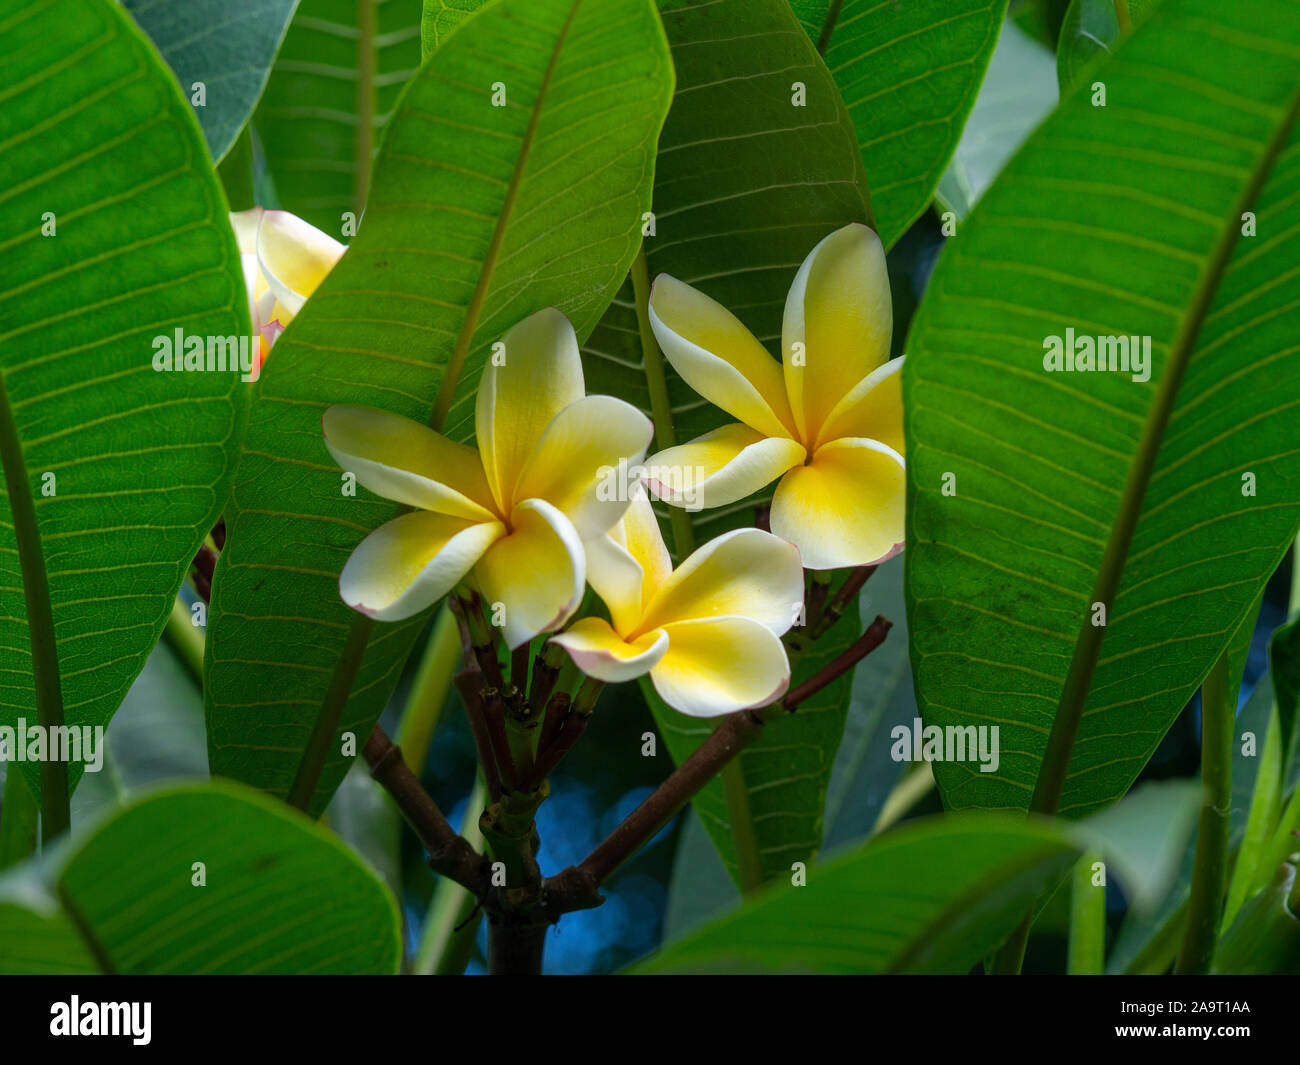 Closeup of pretty frangipani flowers with yellow and white petals and large green leaves Stock Photo